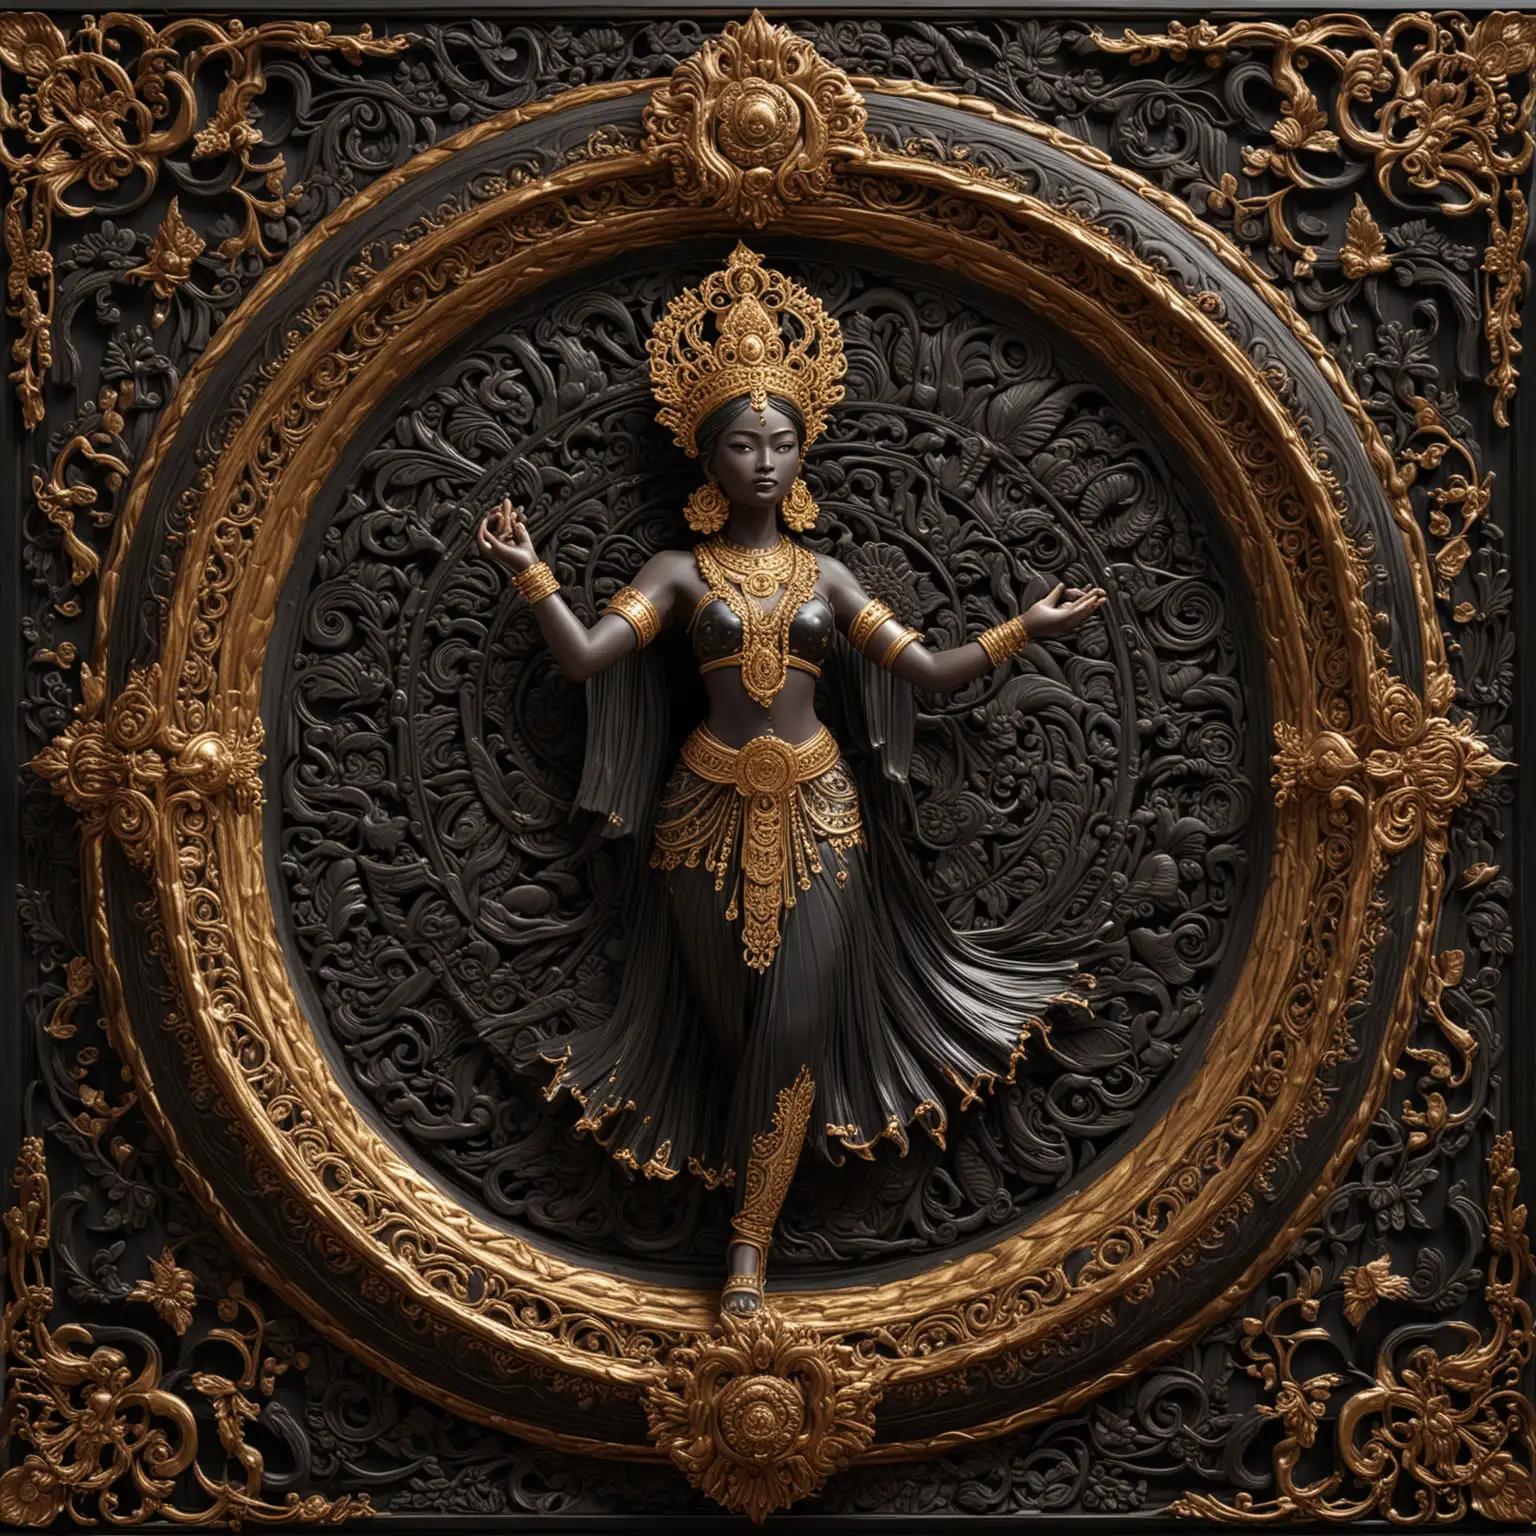 Thai-Dancer-Carved-in-Black-Lacquered-Wood-with-Gold-Headdress